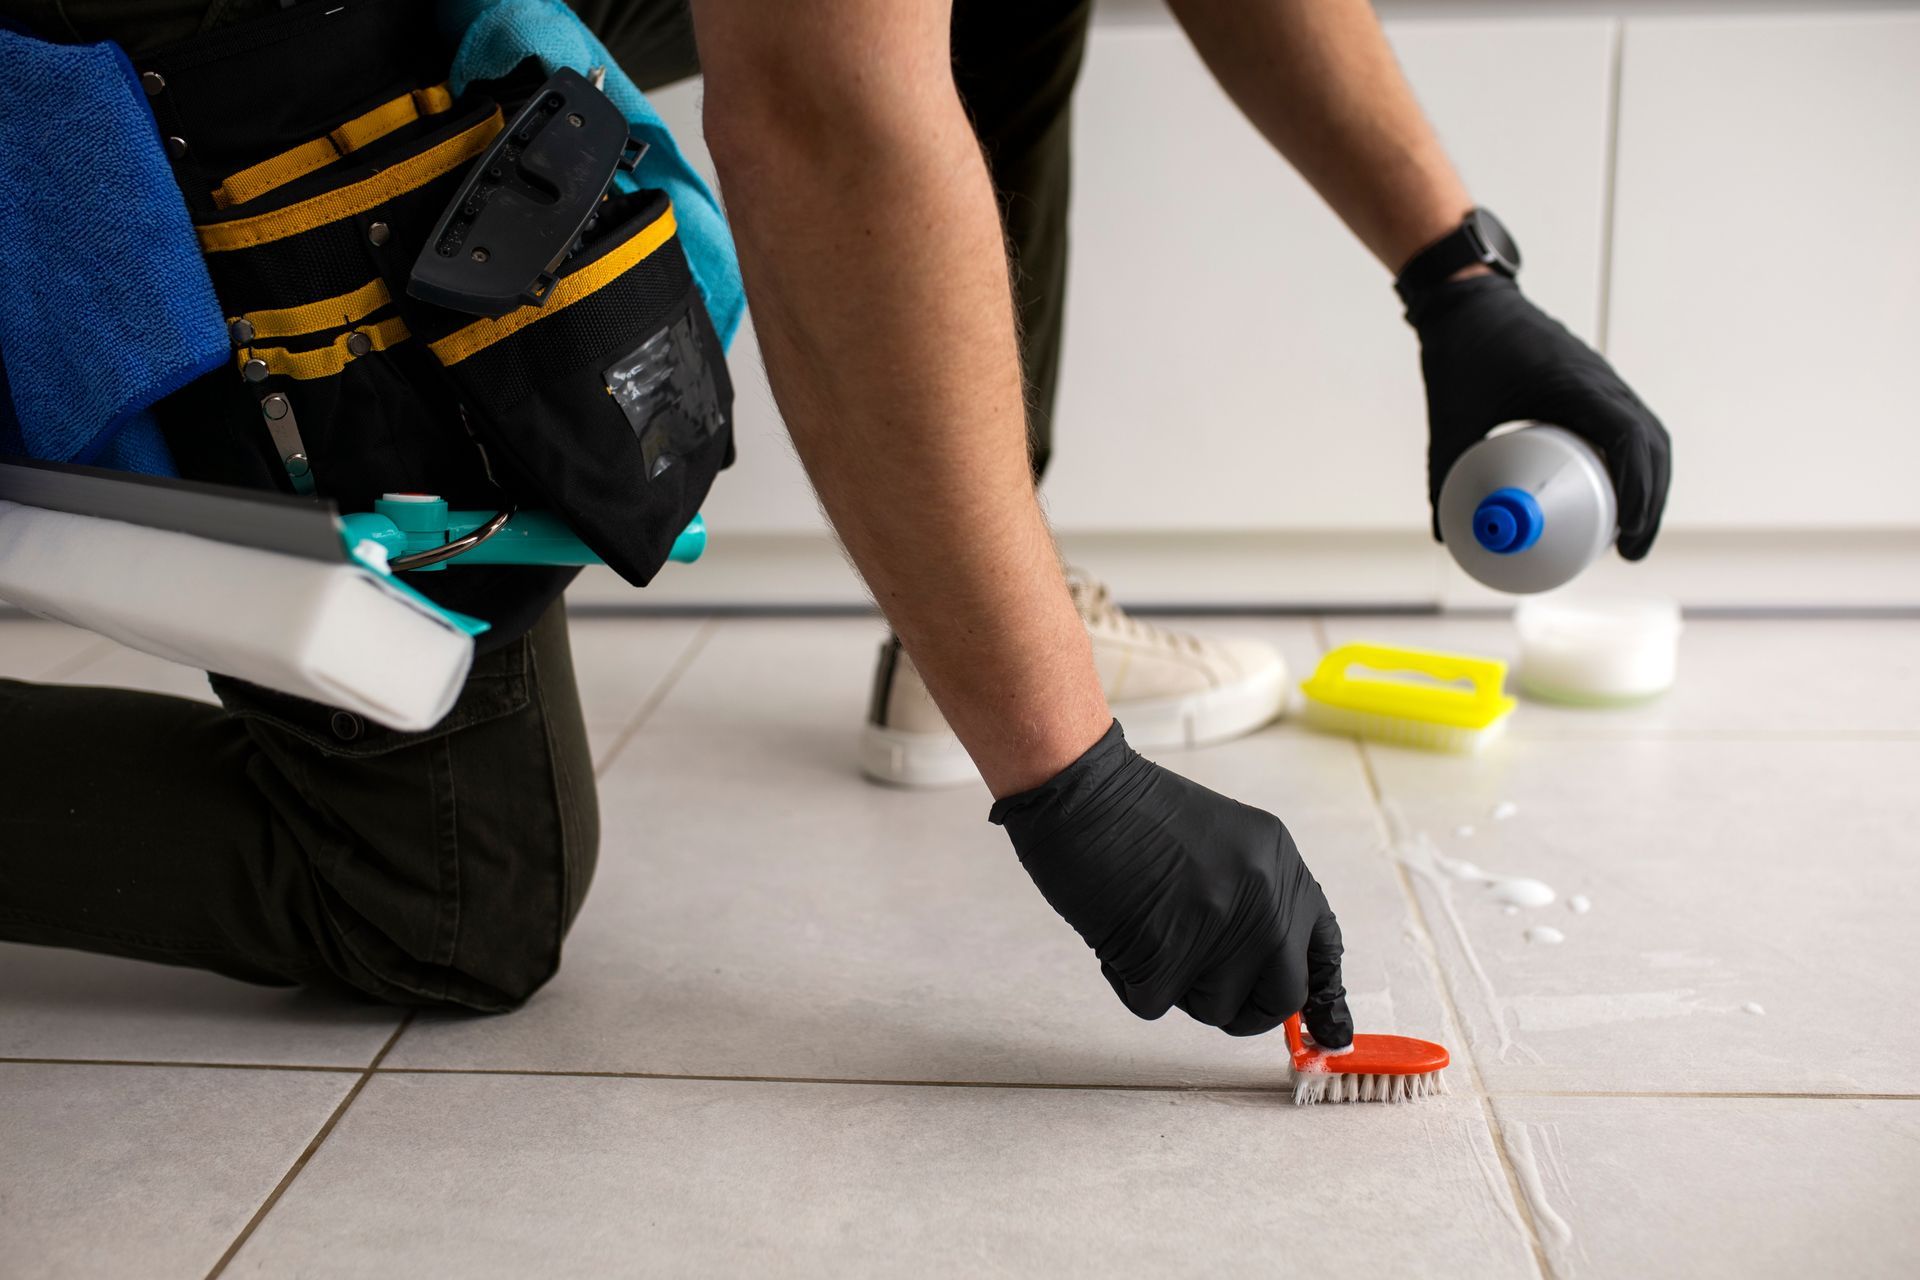 a person is cleaning a tile floor with a brush .